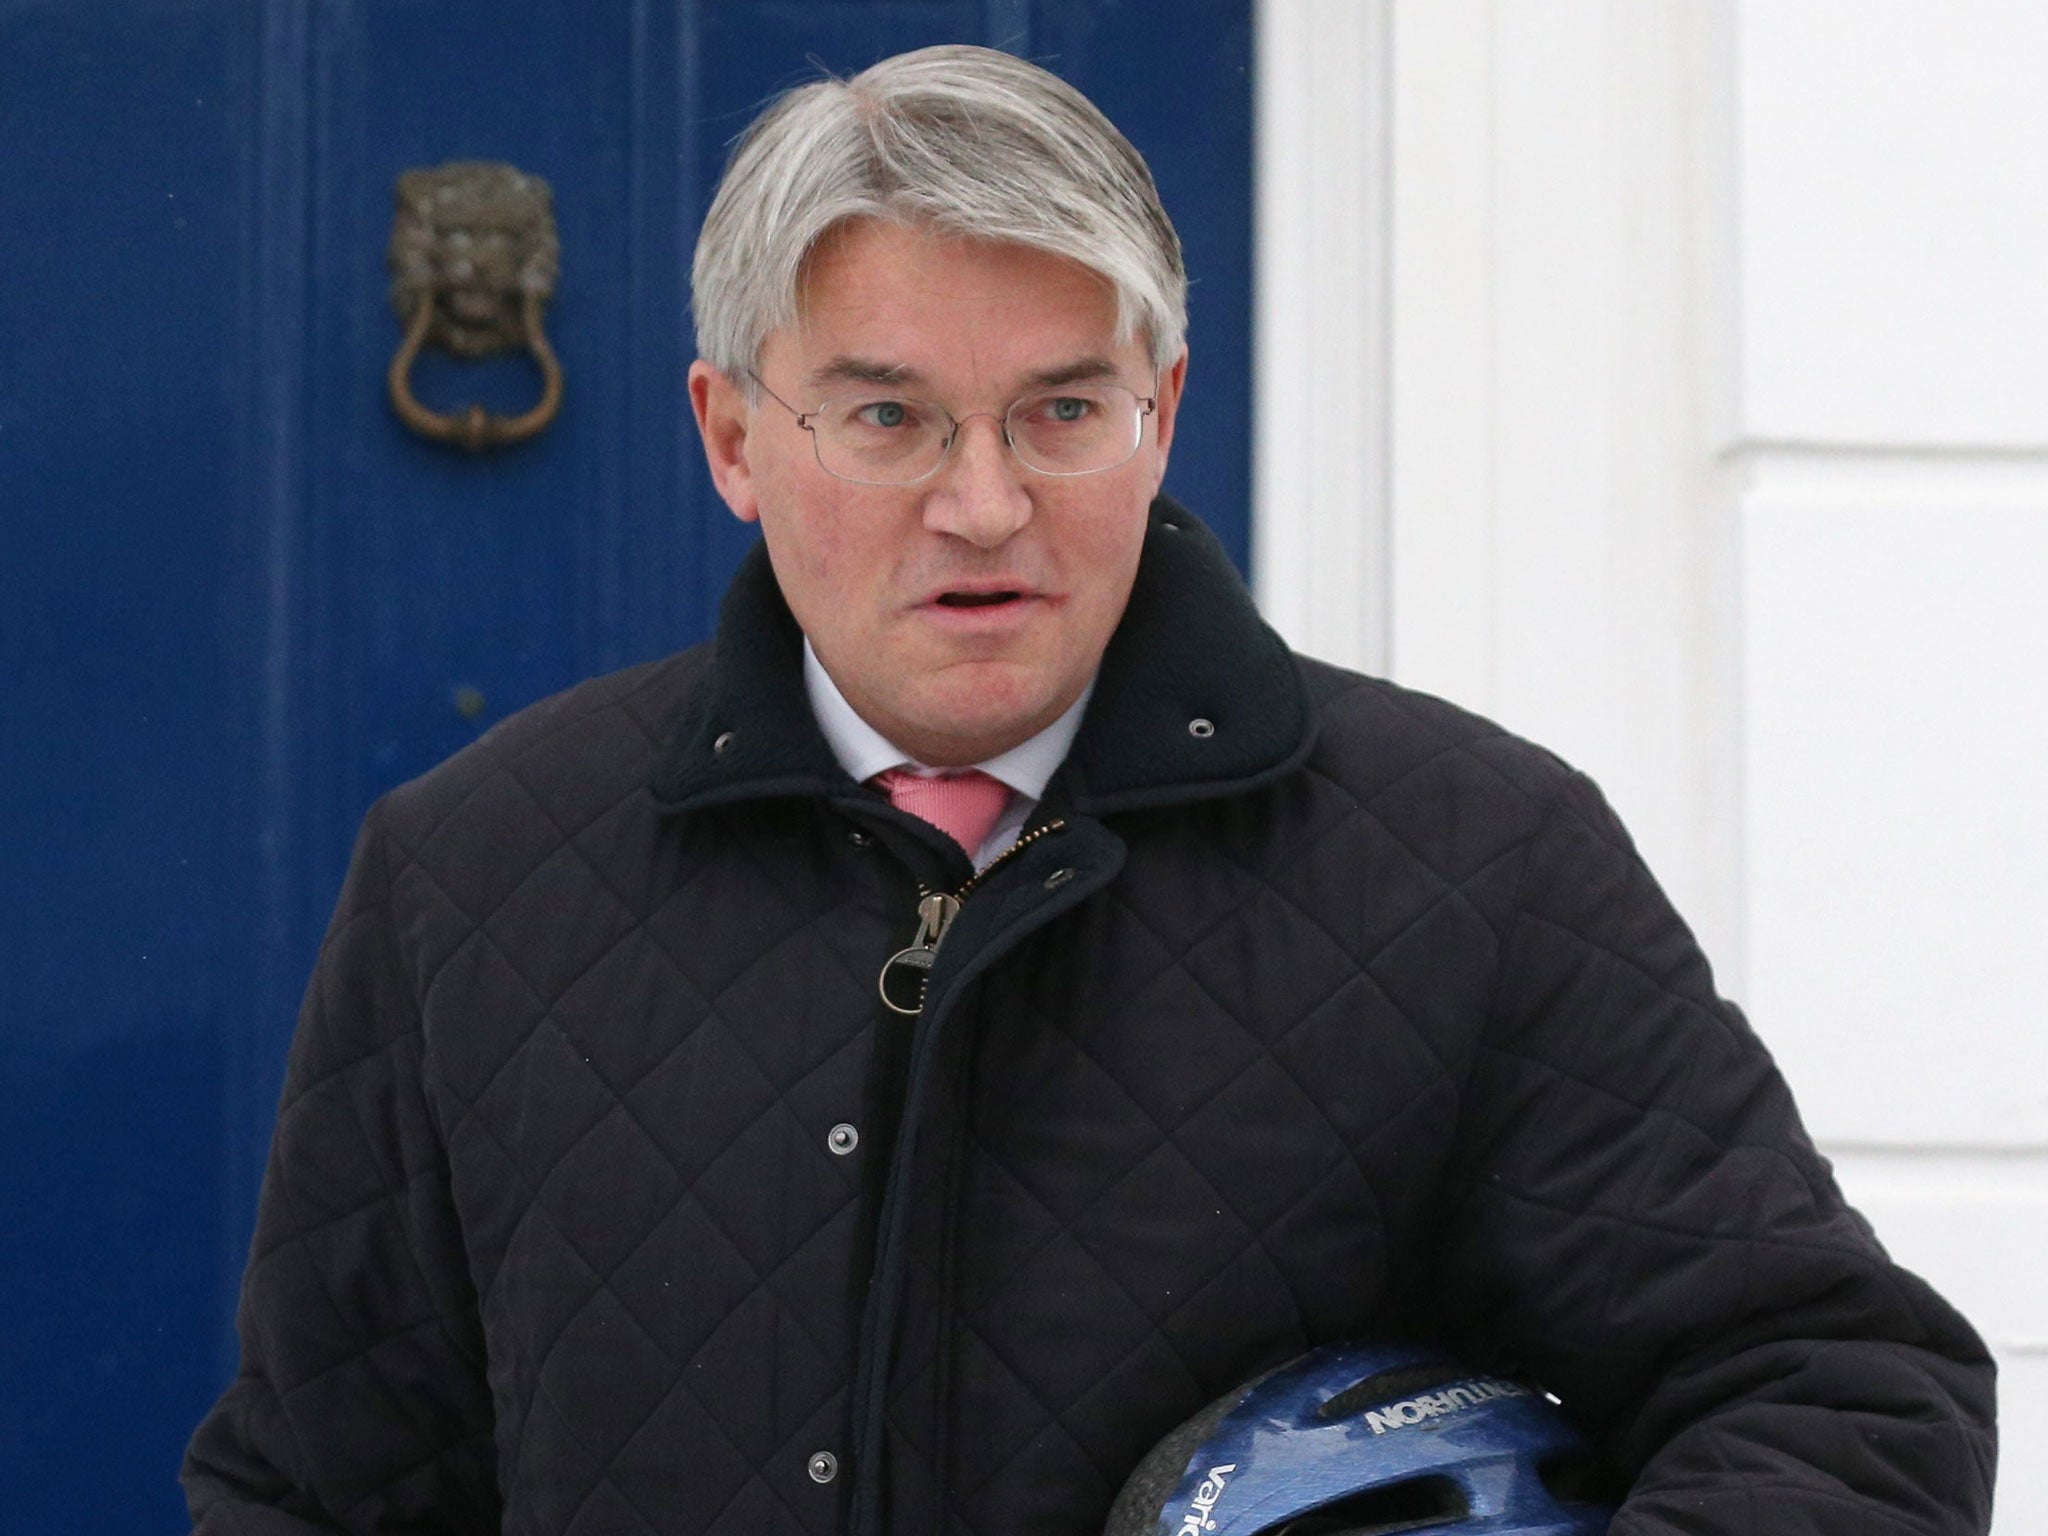 Six policemen are now under investigation over the “Plebgate” affair - as a second officer was arrested over an alleged conspiracy that led to the resignation of former chief whip Andrew Mitchell